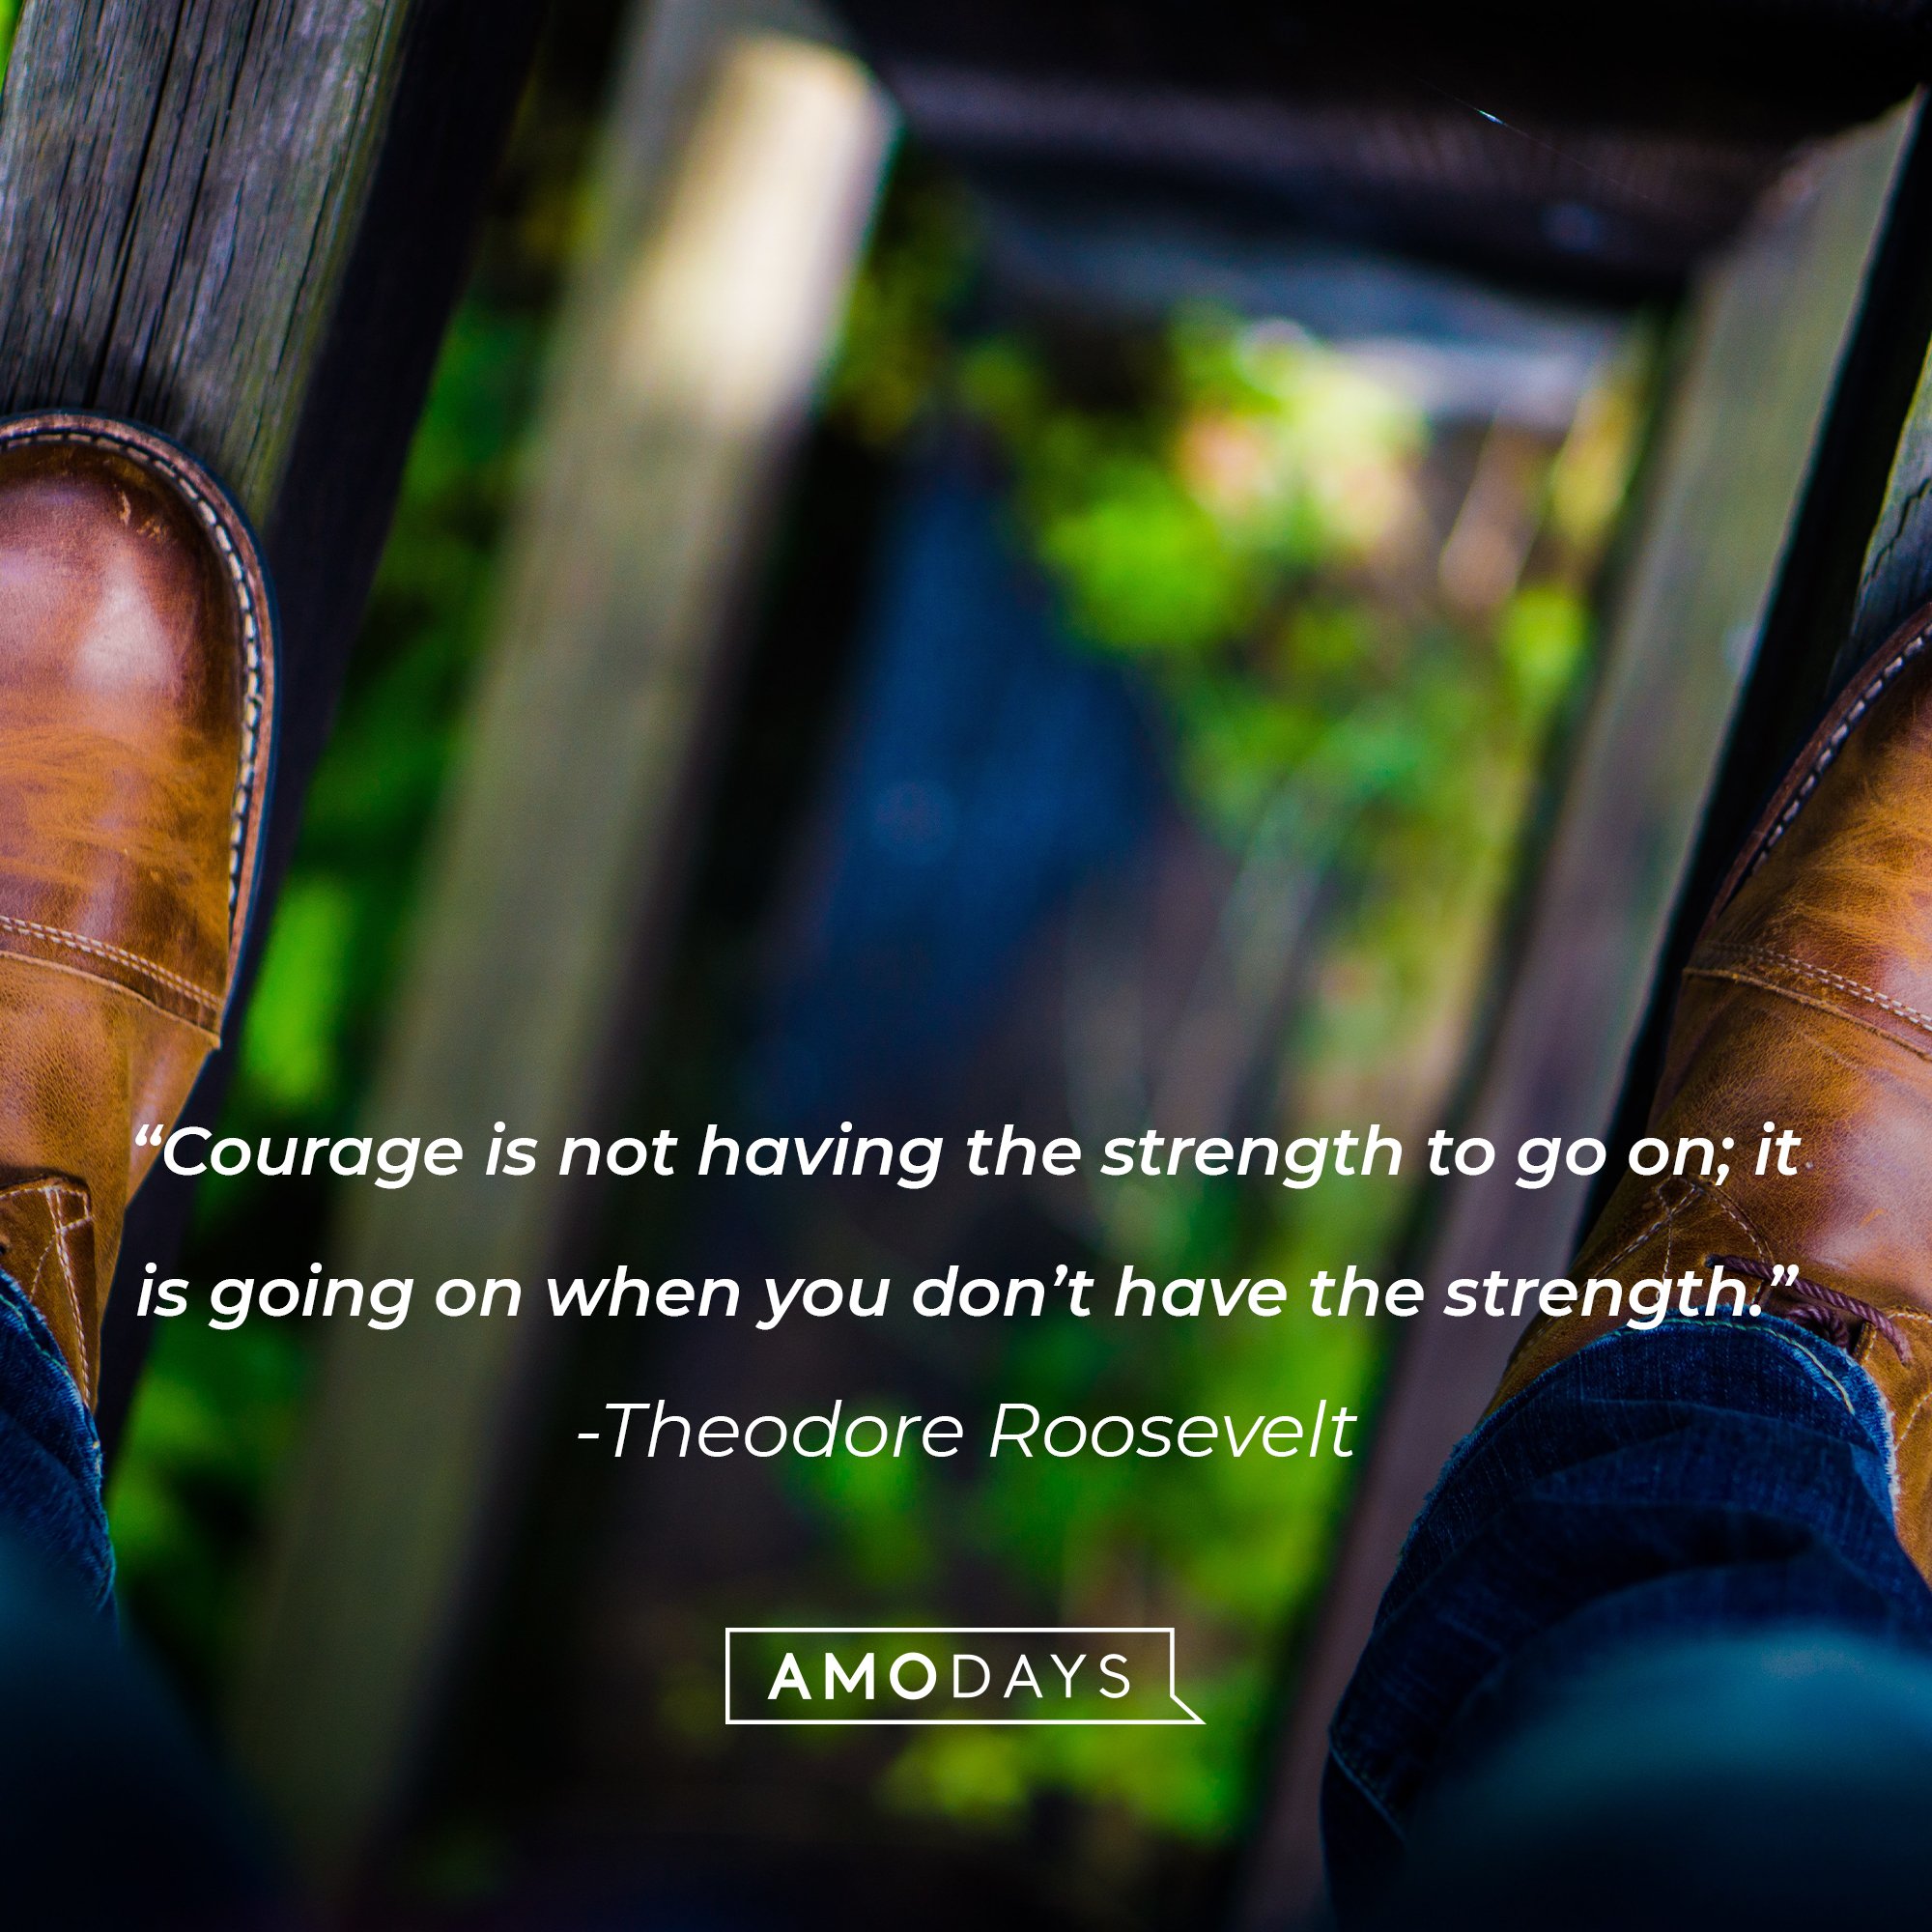 Theodore Roosevelt's quote: "Courage is not having the strength to go on; it is going on when you don't have the strength." | Image: AmoDays